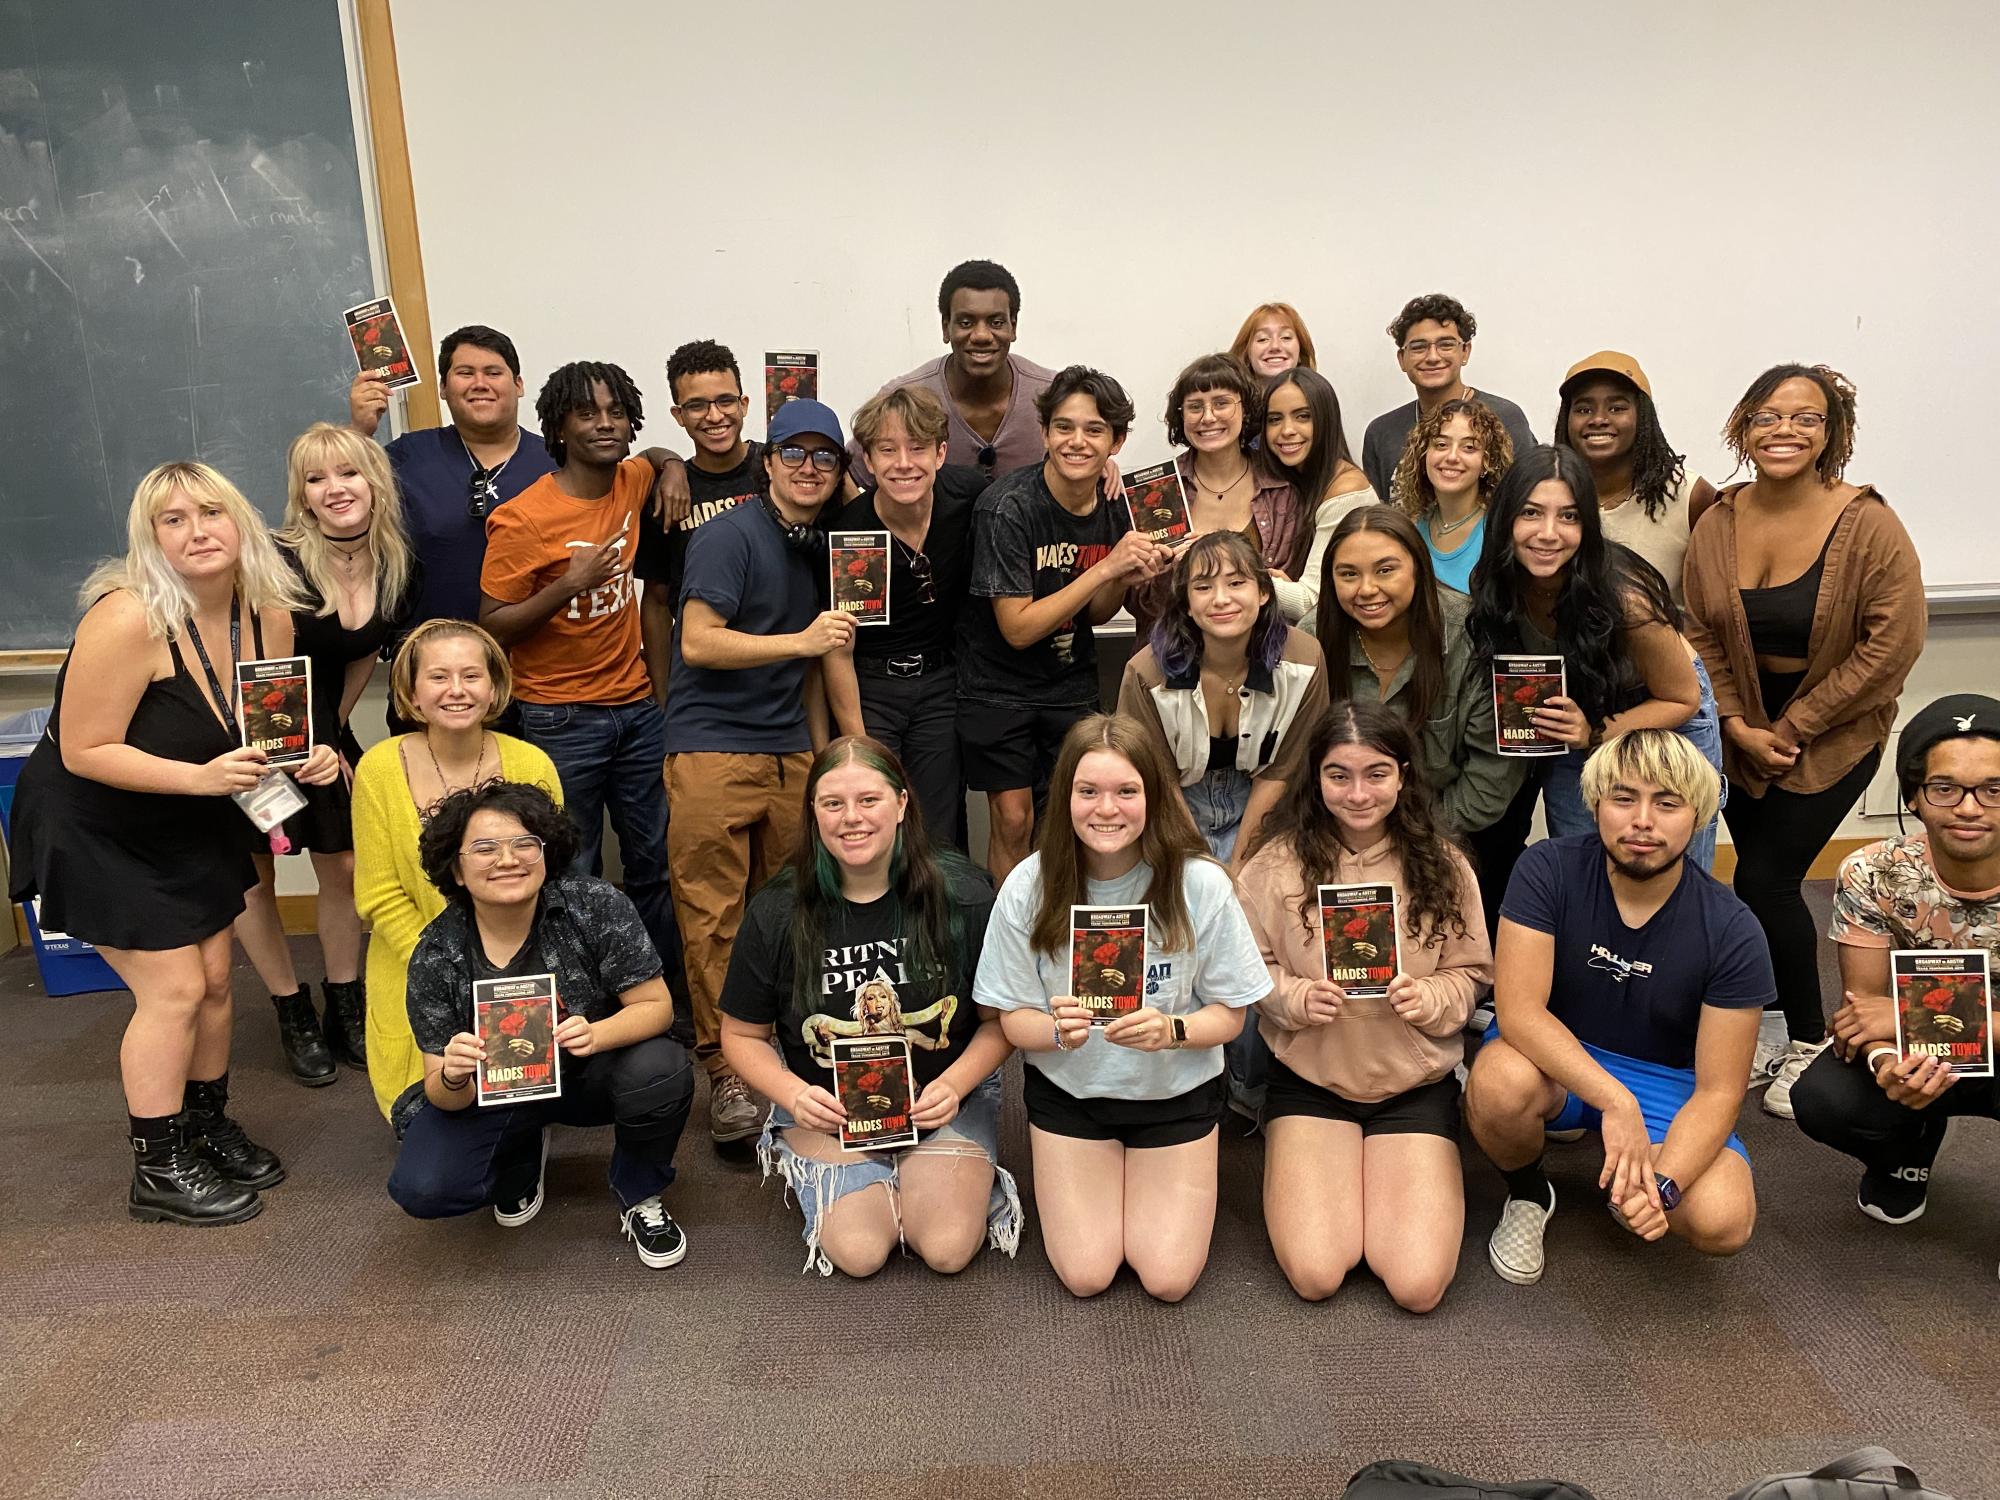 Theatre and Dance students pose with playbills from HADESTOWN